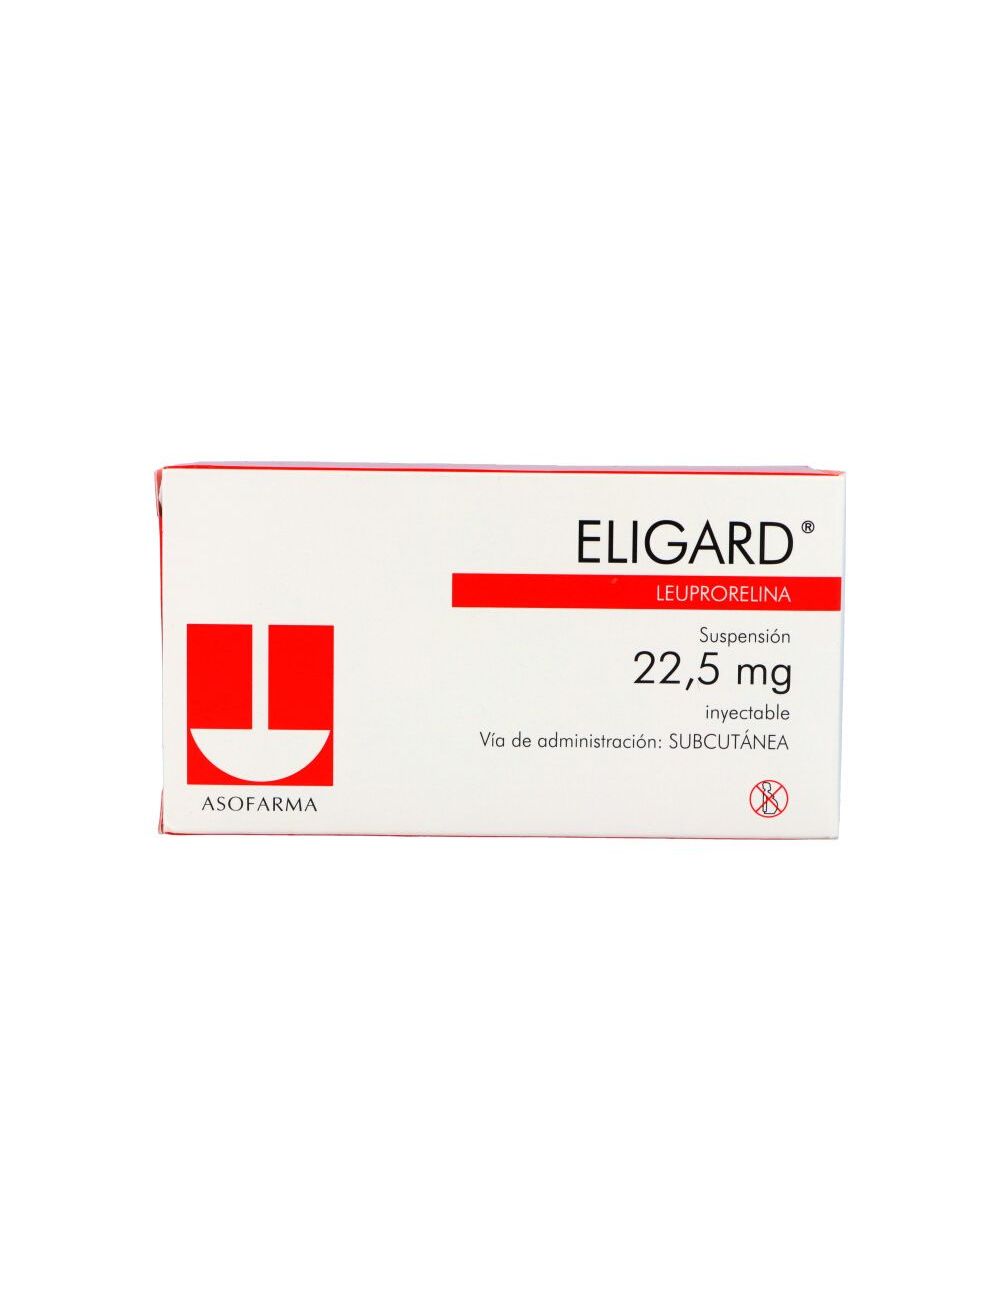 ELIGARD SOL INY 22.5MG C2 AMP